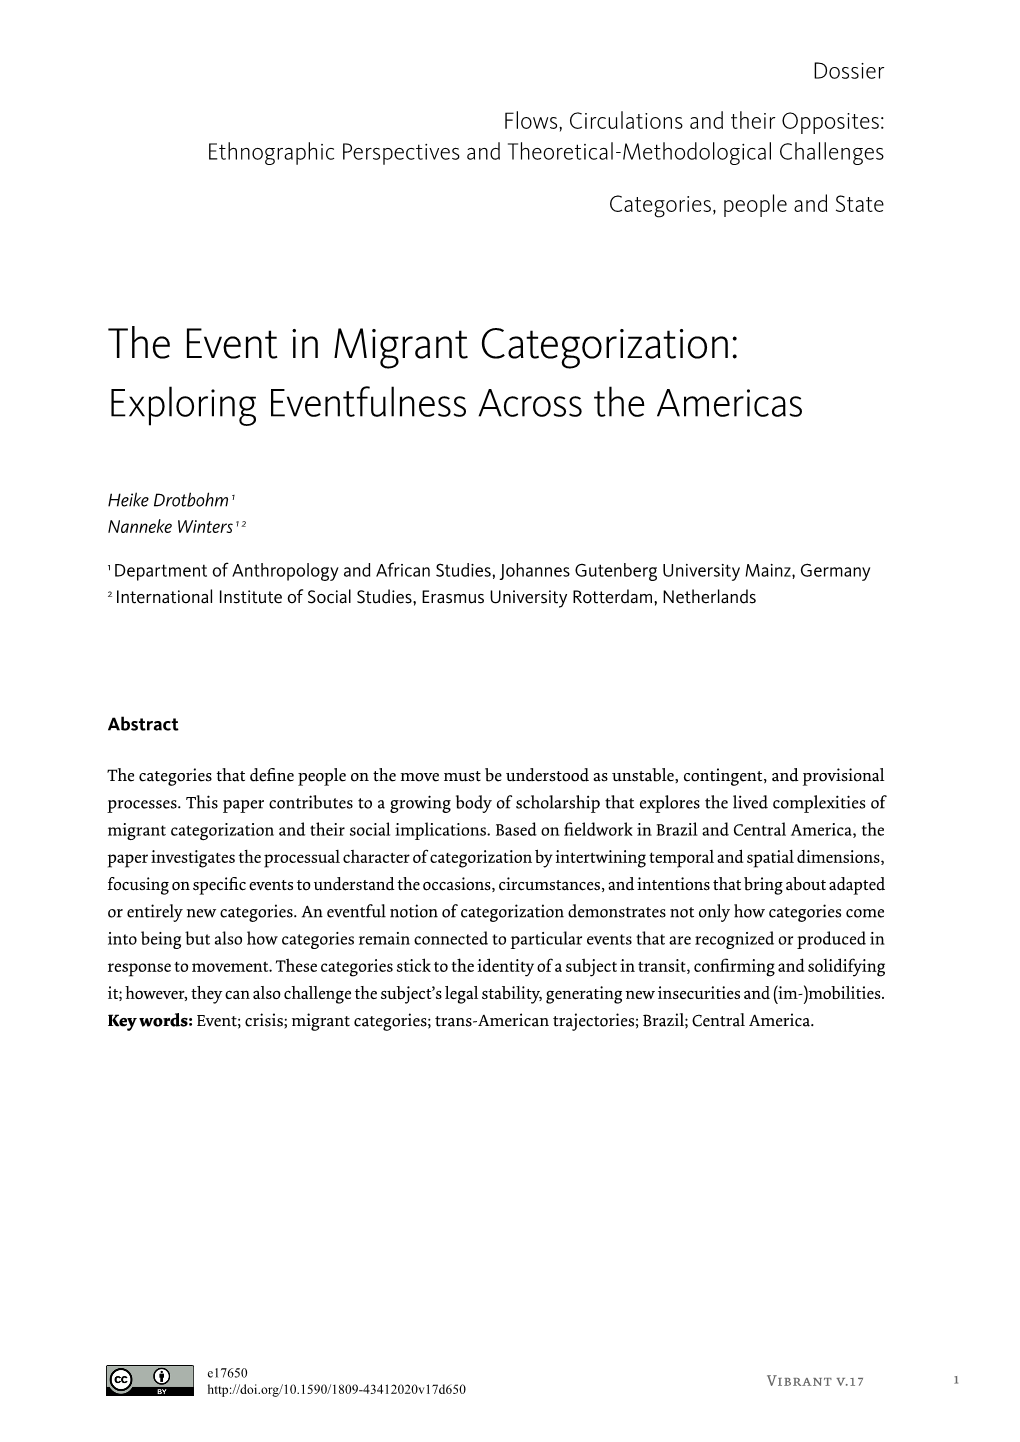 The Event in Migrant Categorization: Exploring Eventfulness Across the Americas